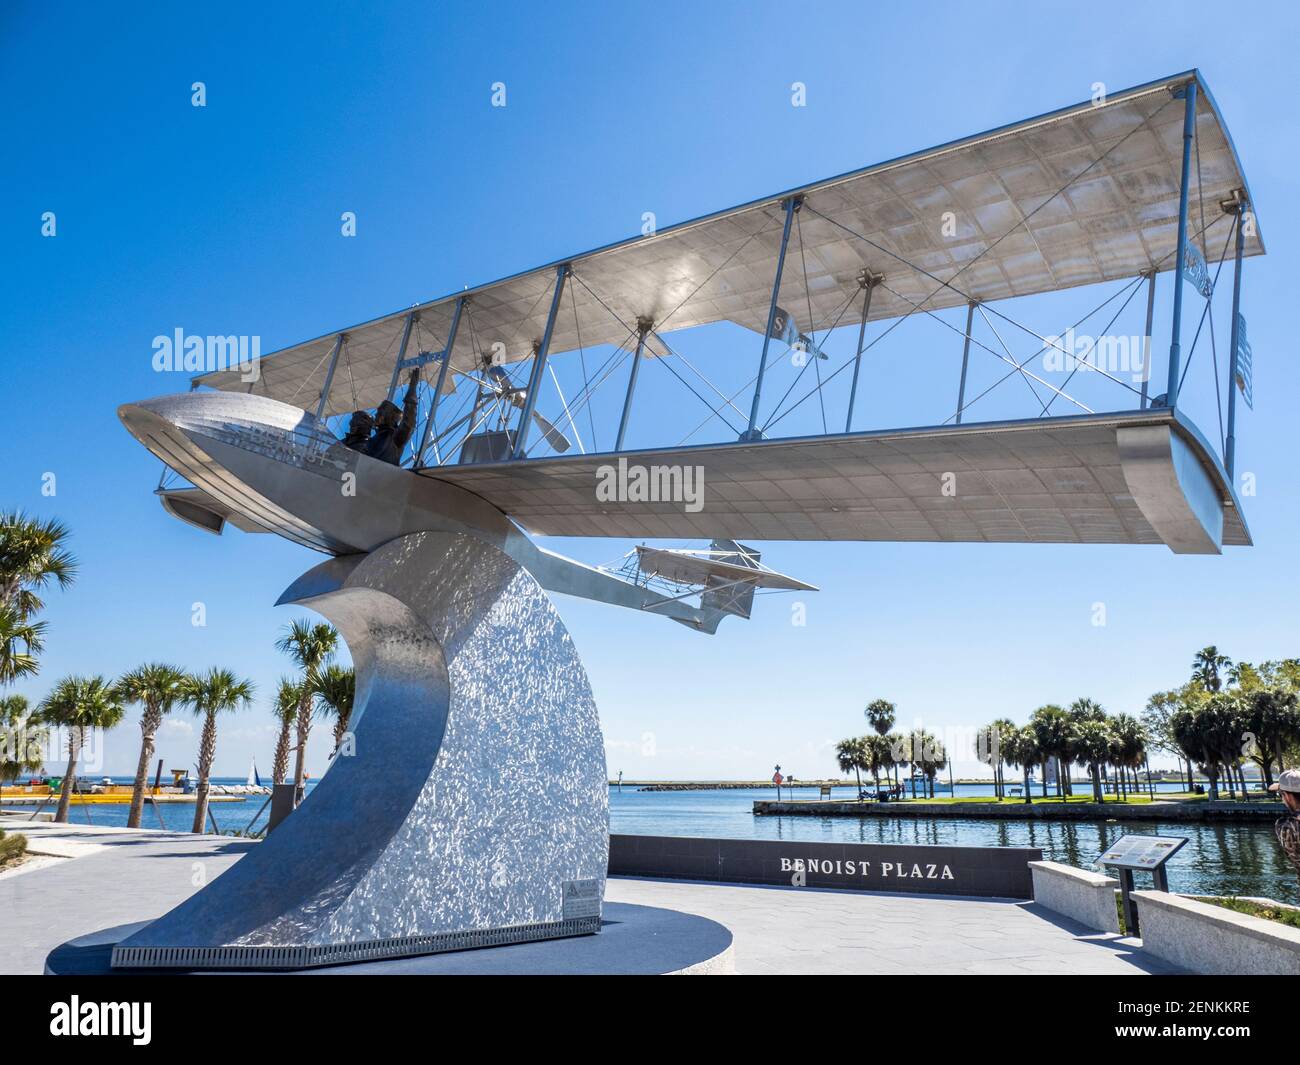 Flying boat at the Worlds First Airline monument in Benoist Plaza on the new St Pete Pier opened in 2020 in St Petersburg Florida USA Stock Photo